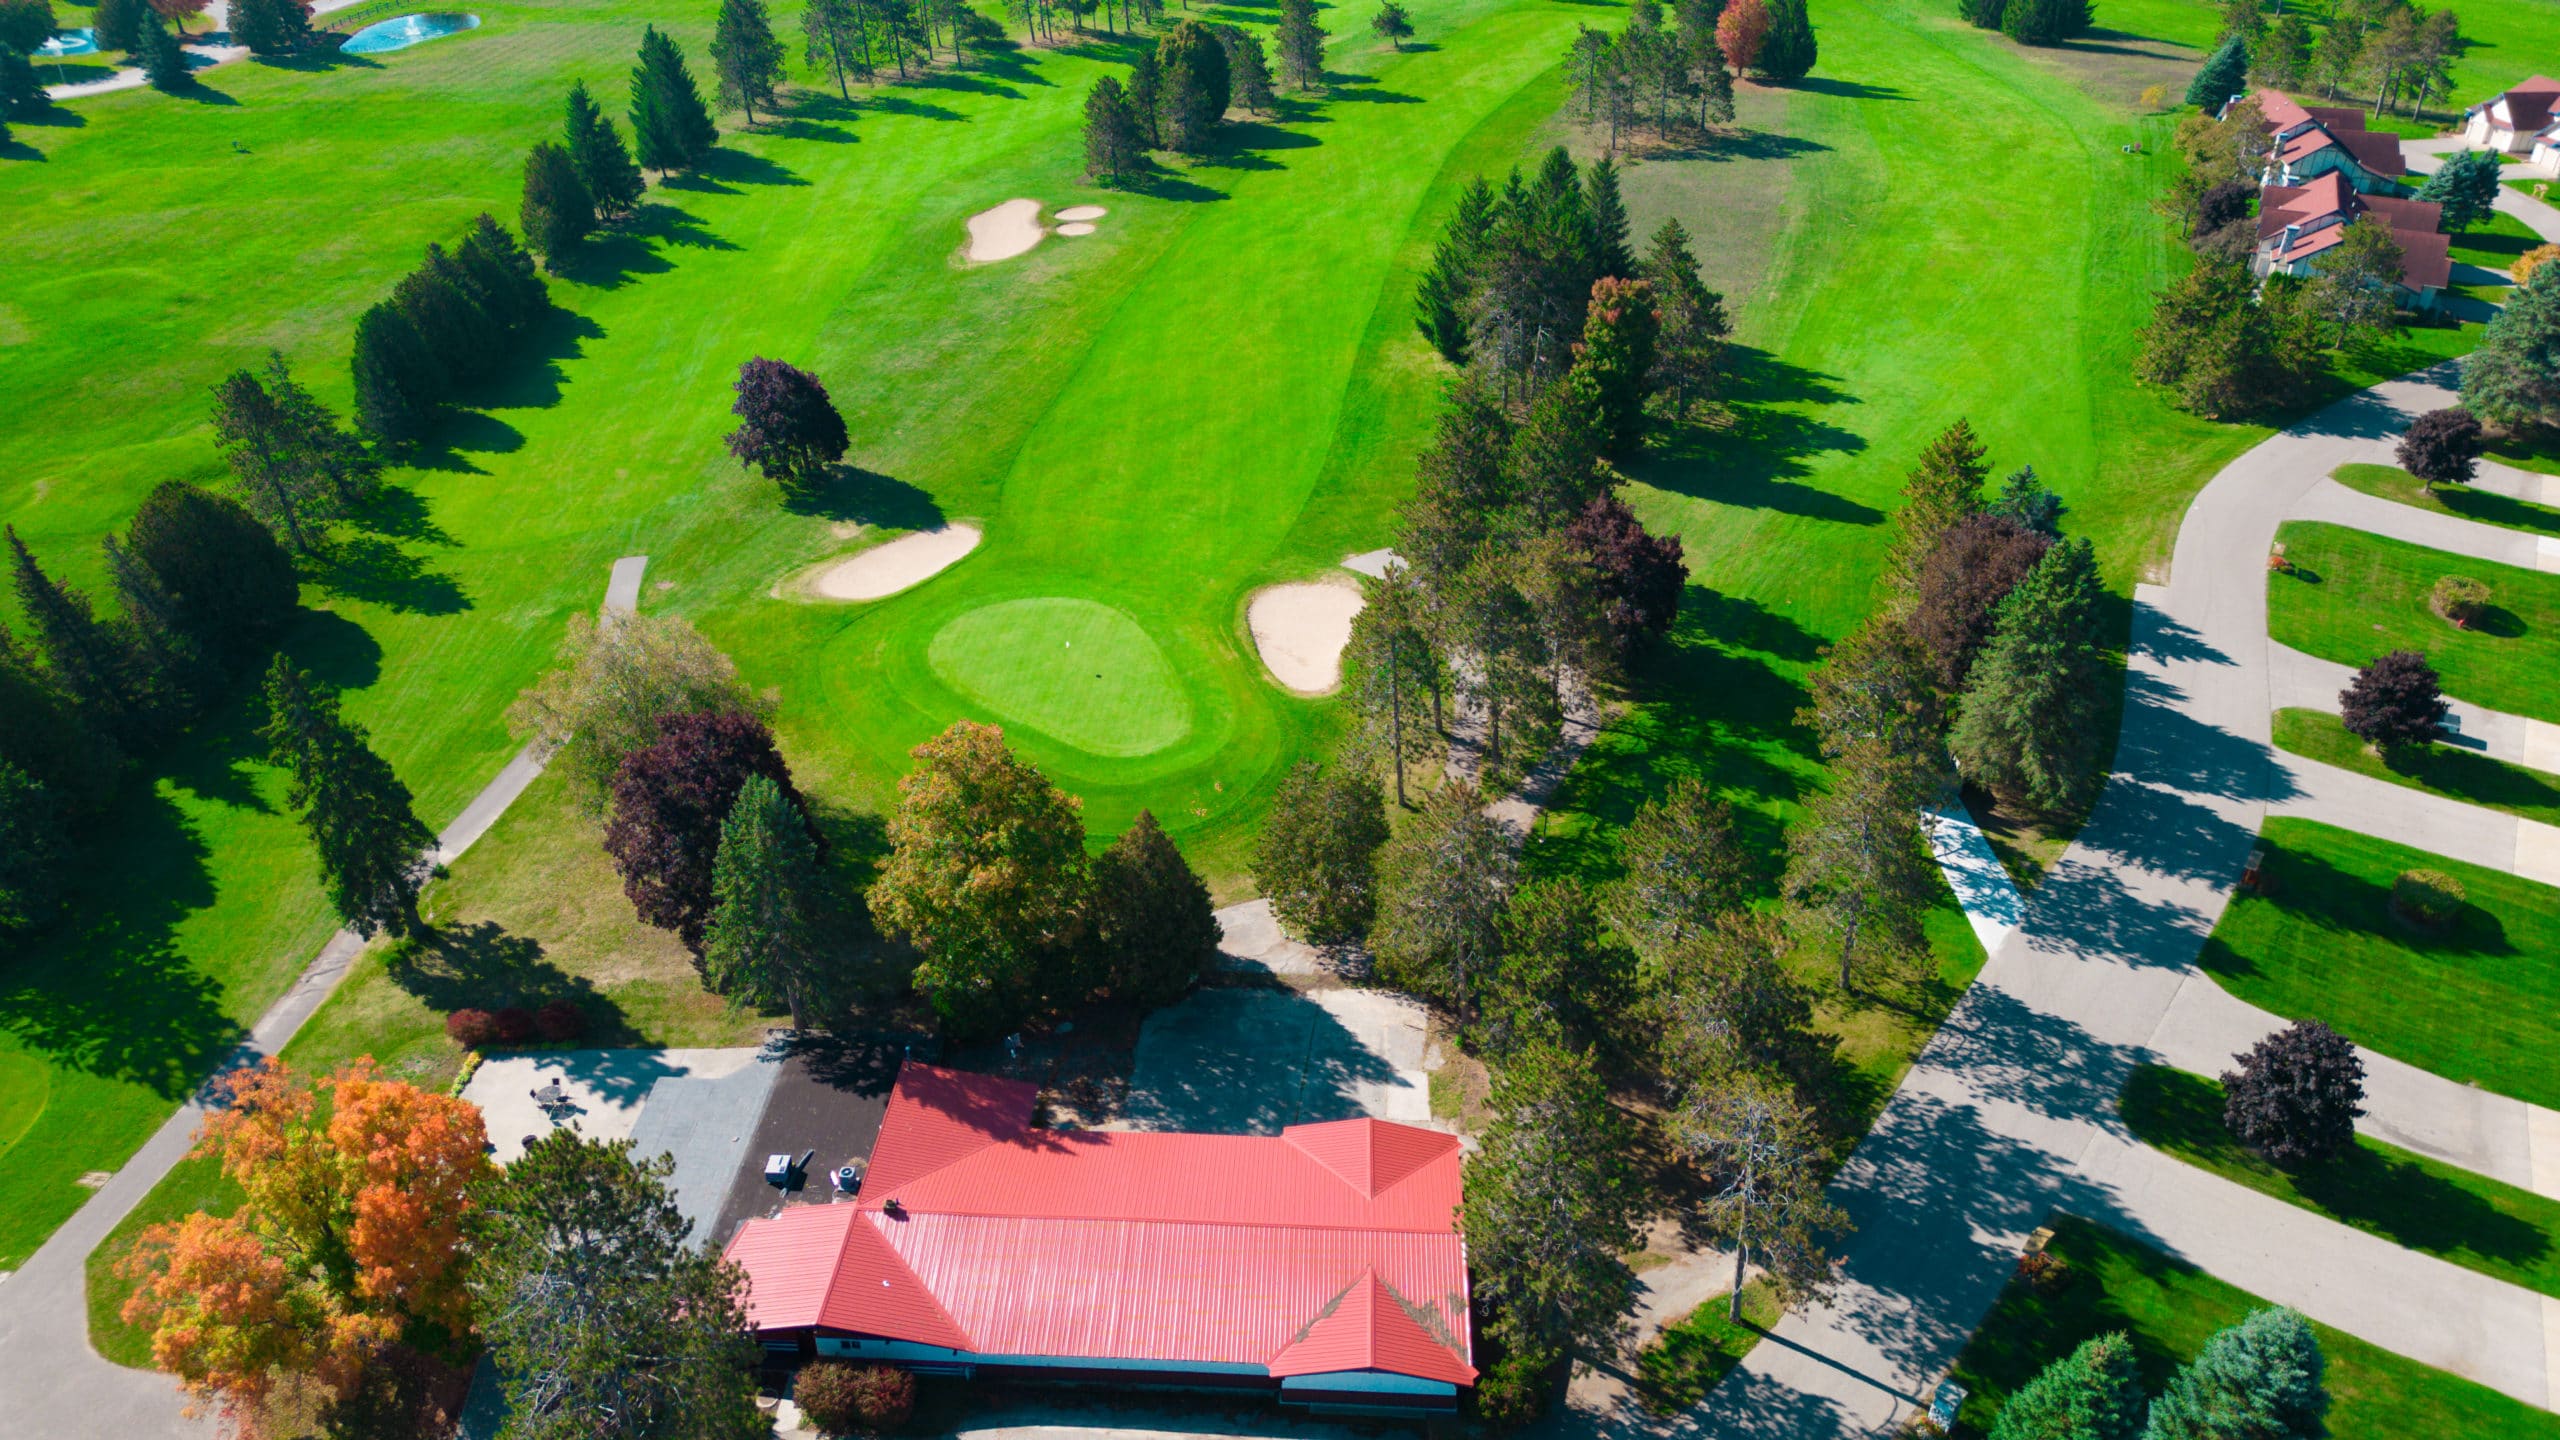 Birds eye view of The Classic Lodge, nestled next to the 18th hole of The Classic golf course.